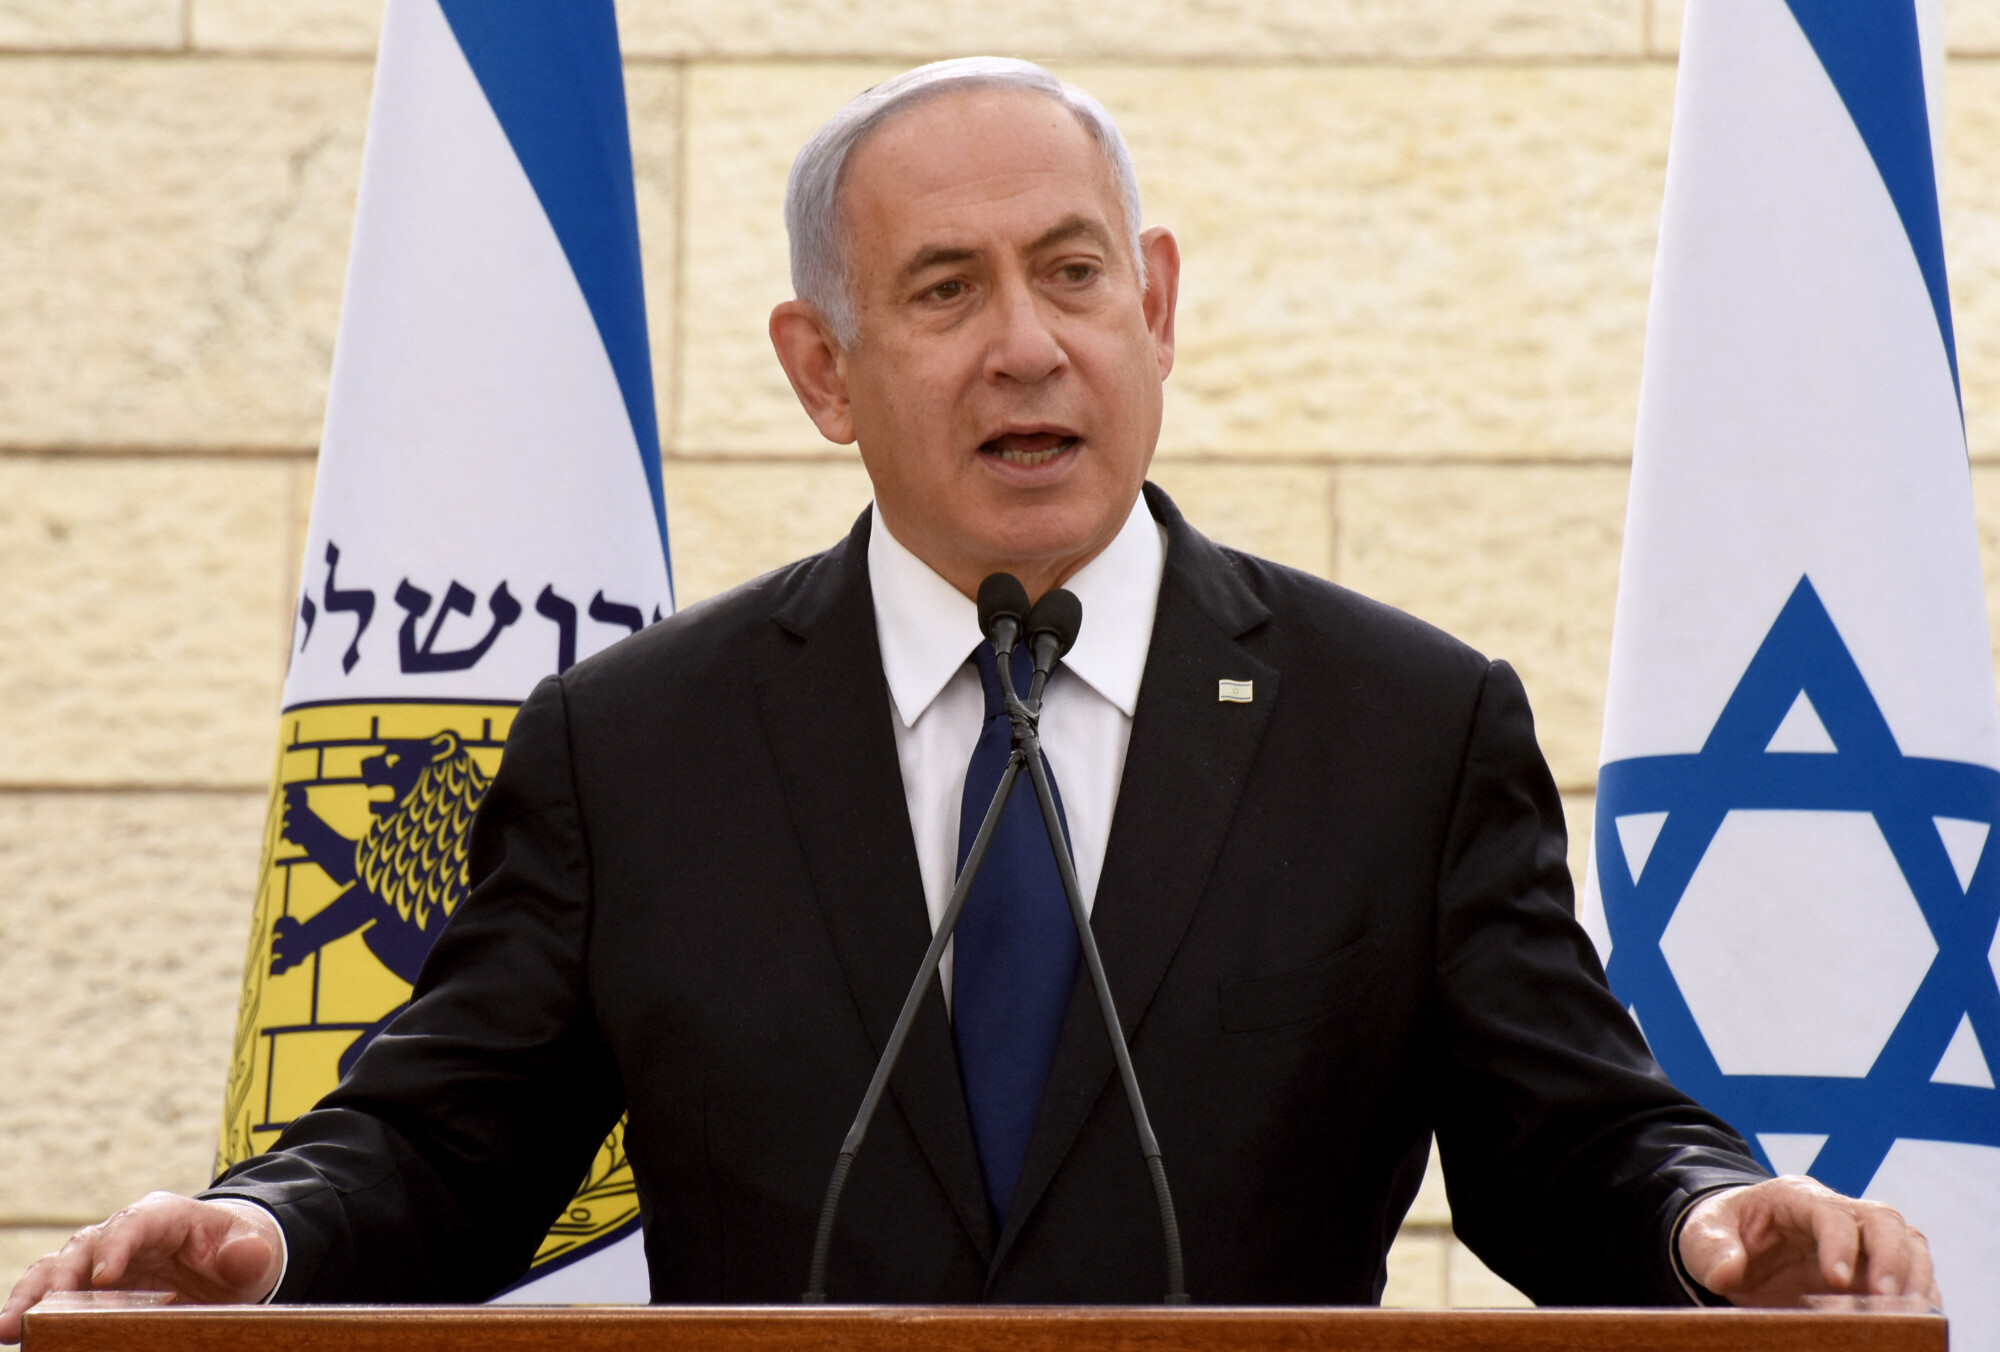 Israel’s Netanyahu Alleges Election Fraud, Accuses Rival of Duplicity